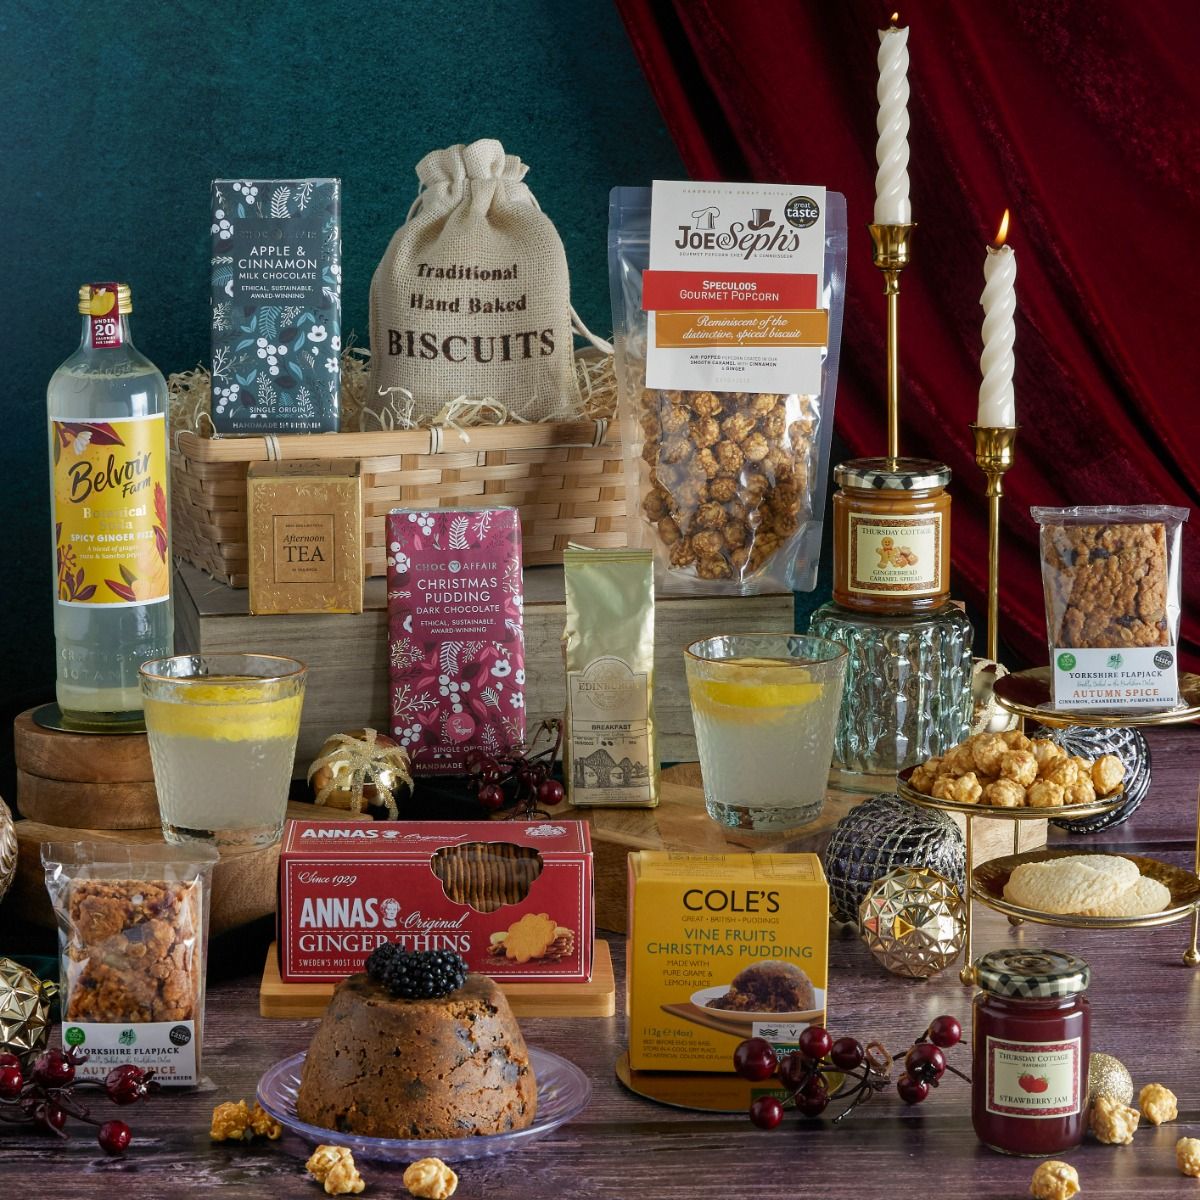  The Luxury Joy of Christmas Hamper with contents on display